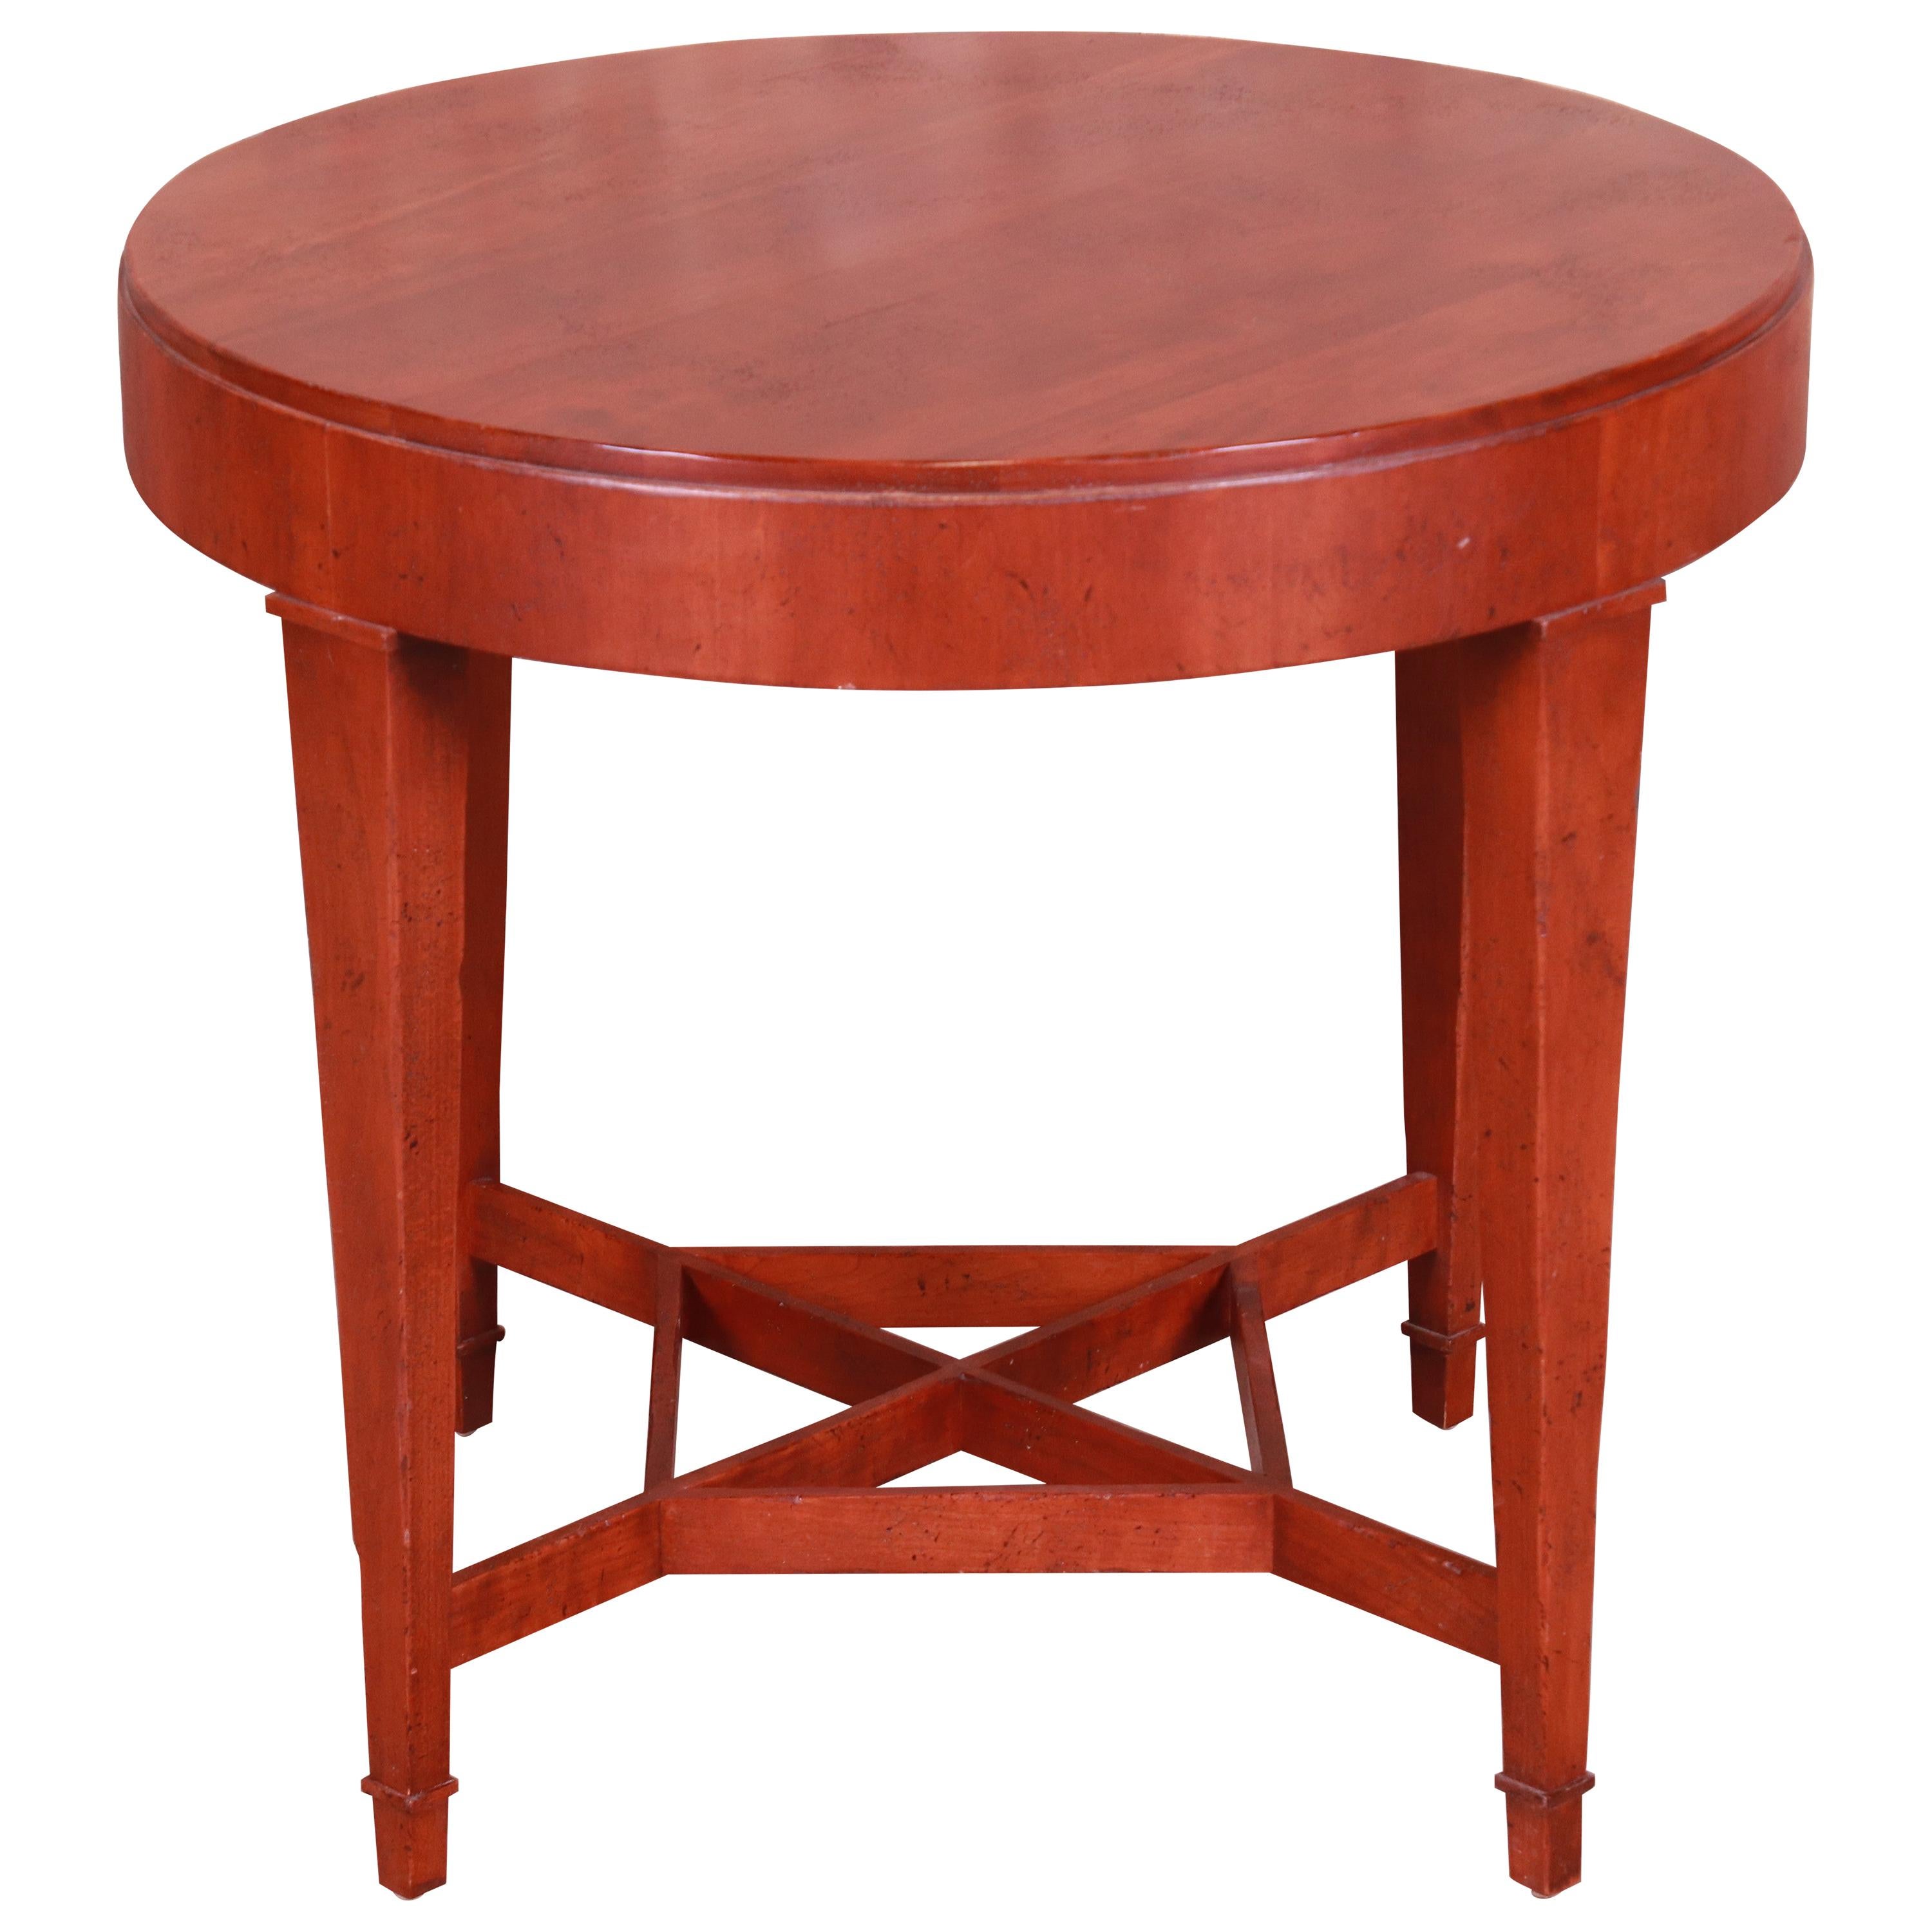 Baker Furniture Milling Road Carved Cherrywood Tea Table or Occasional Table